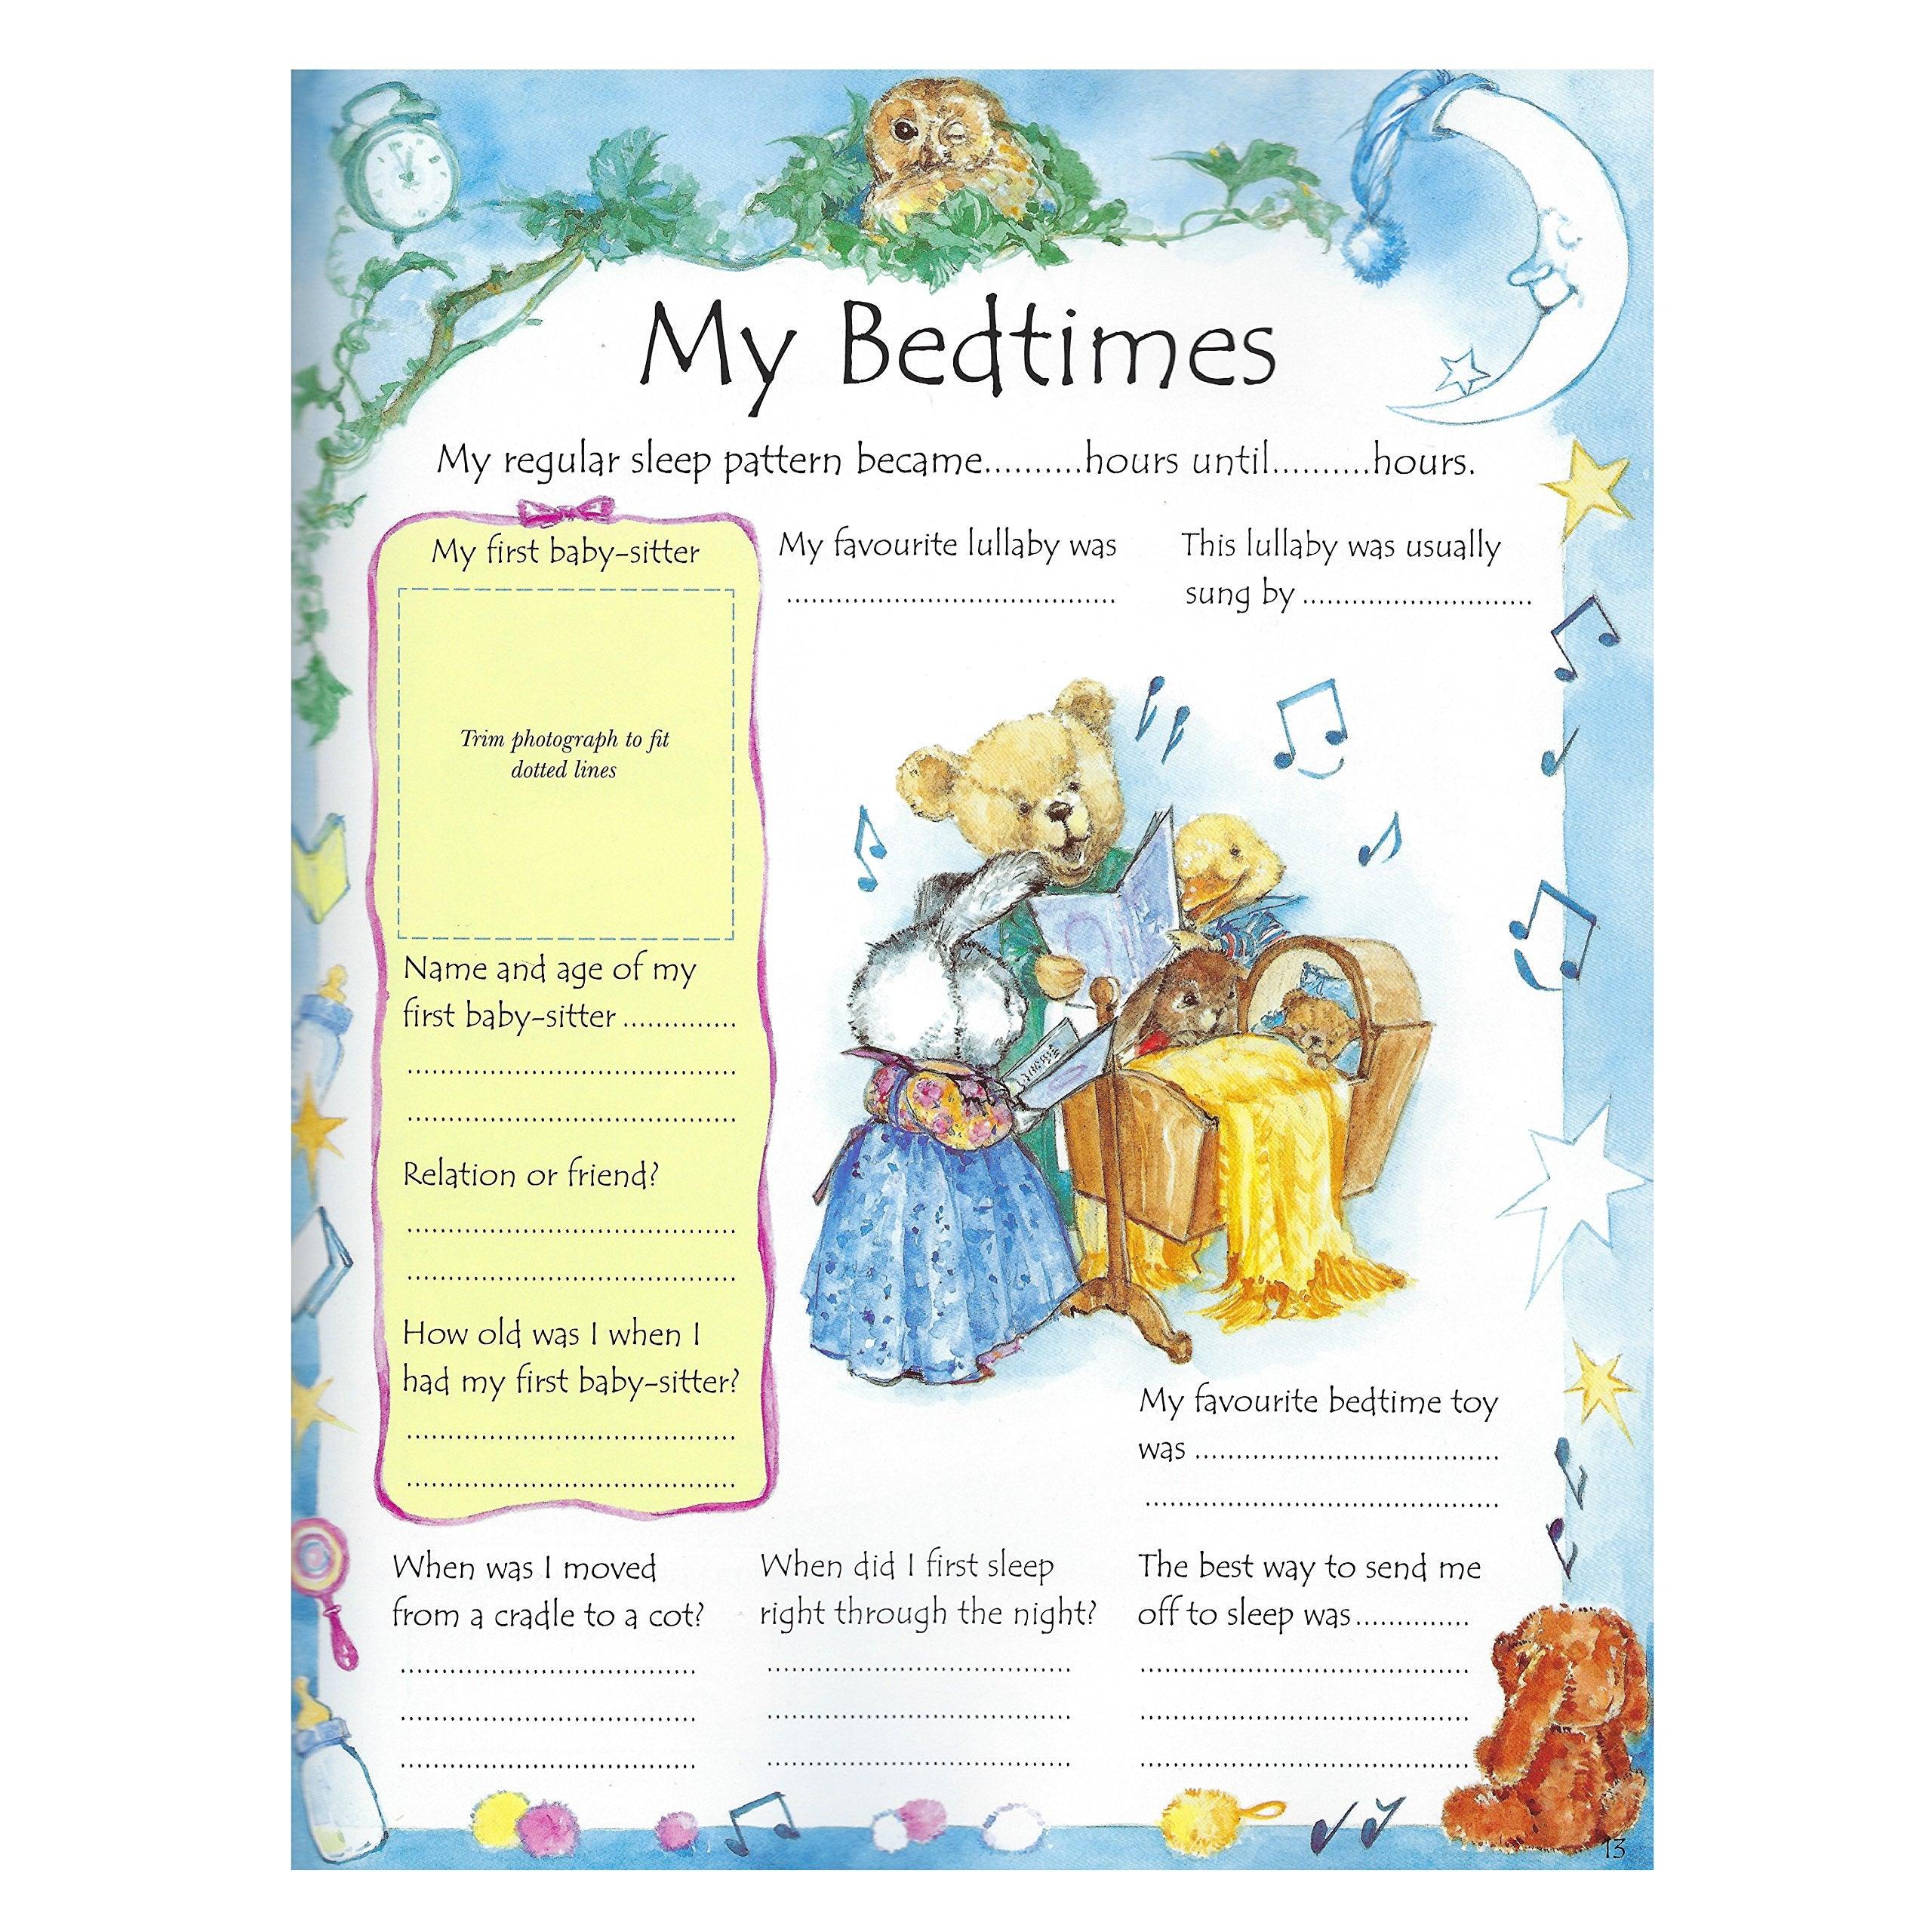 My Baby Book - A First Five Year Diary Baby Record - Ourkids - OKO